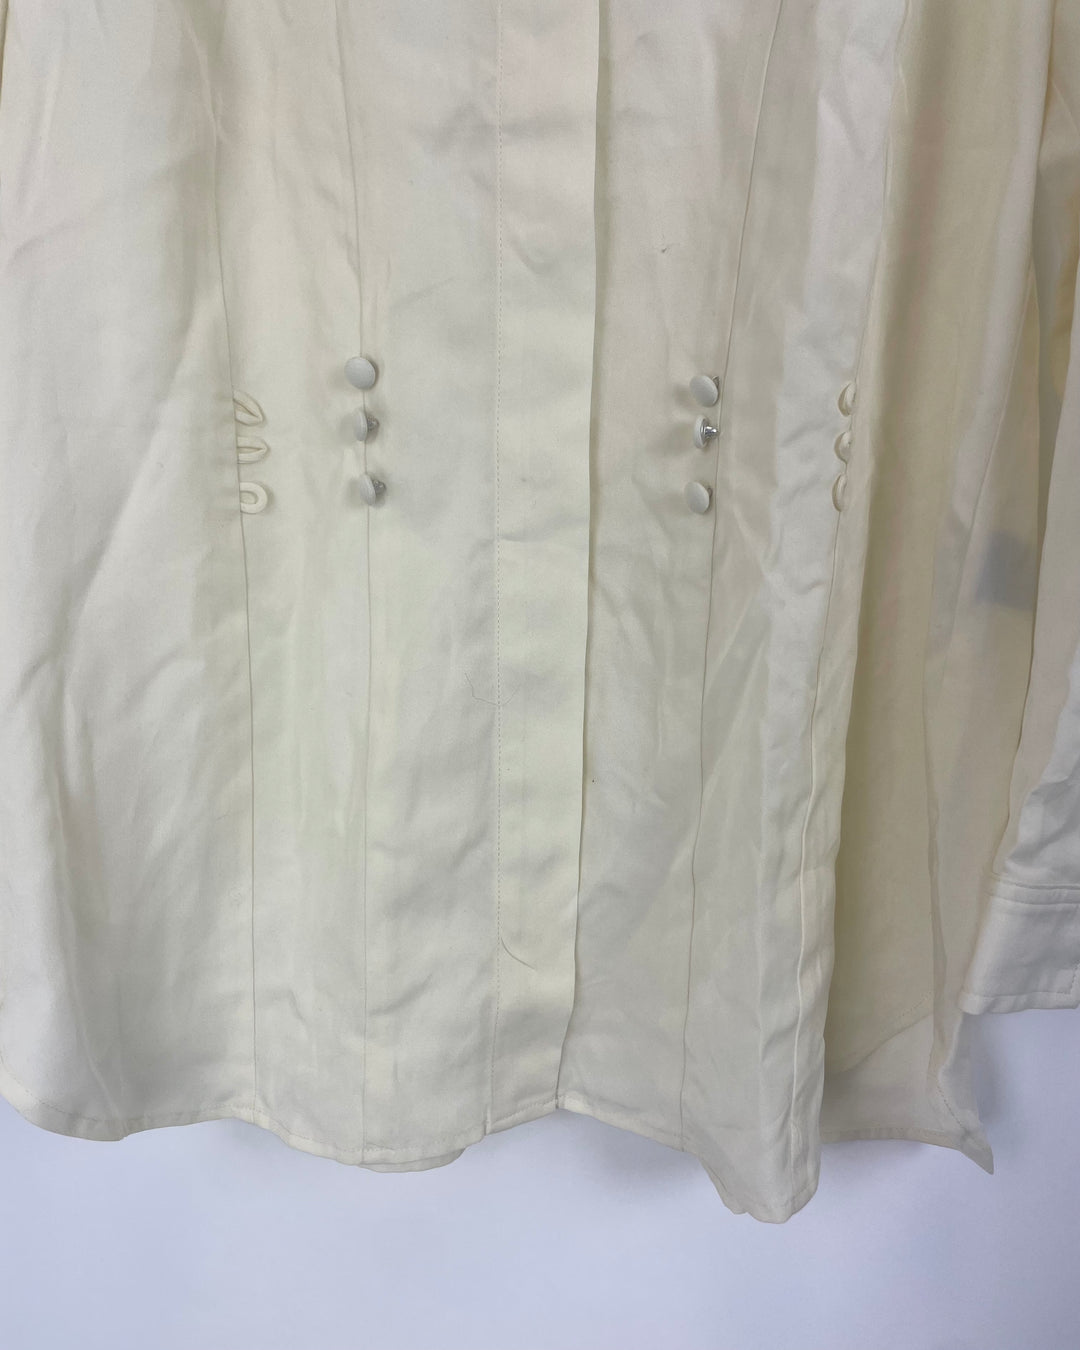 White Long Sleeve Blouse - Size 16 and 18